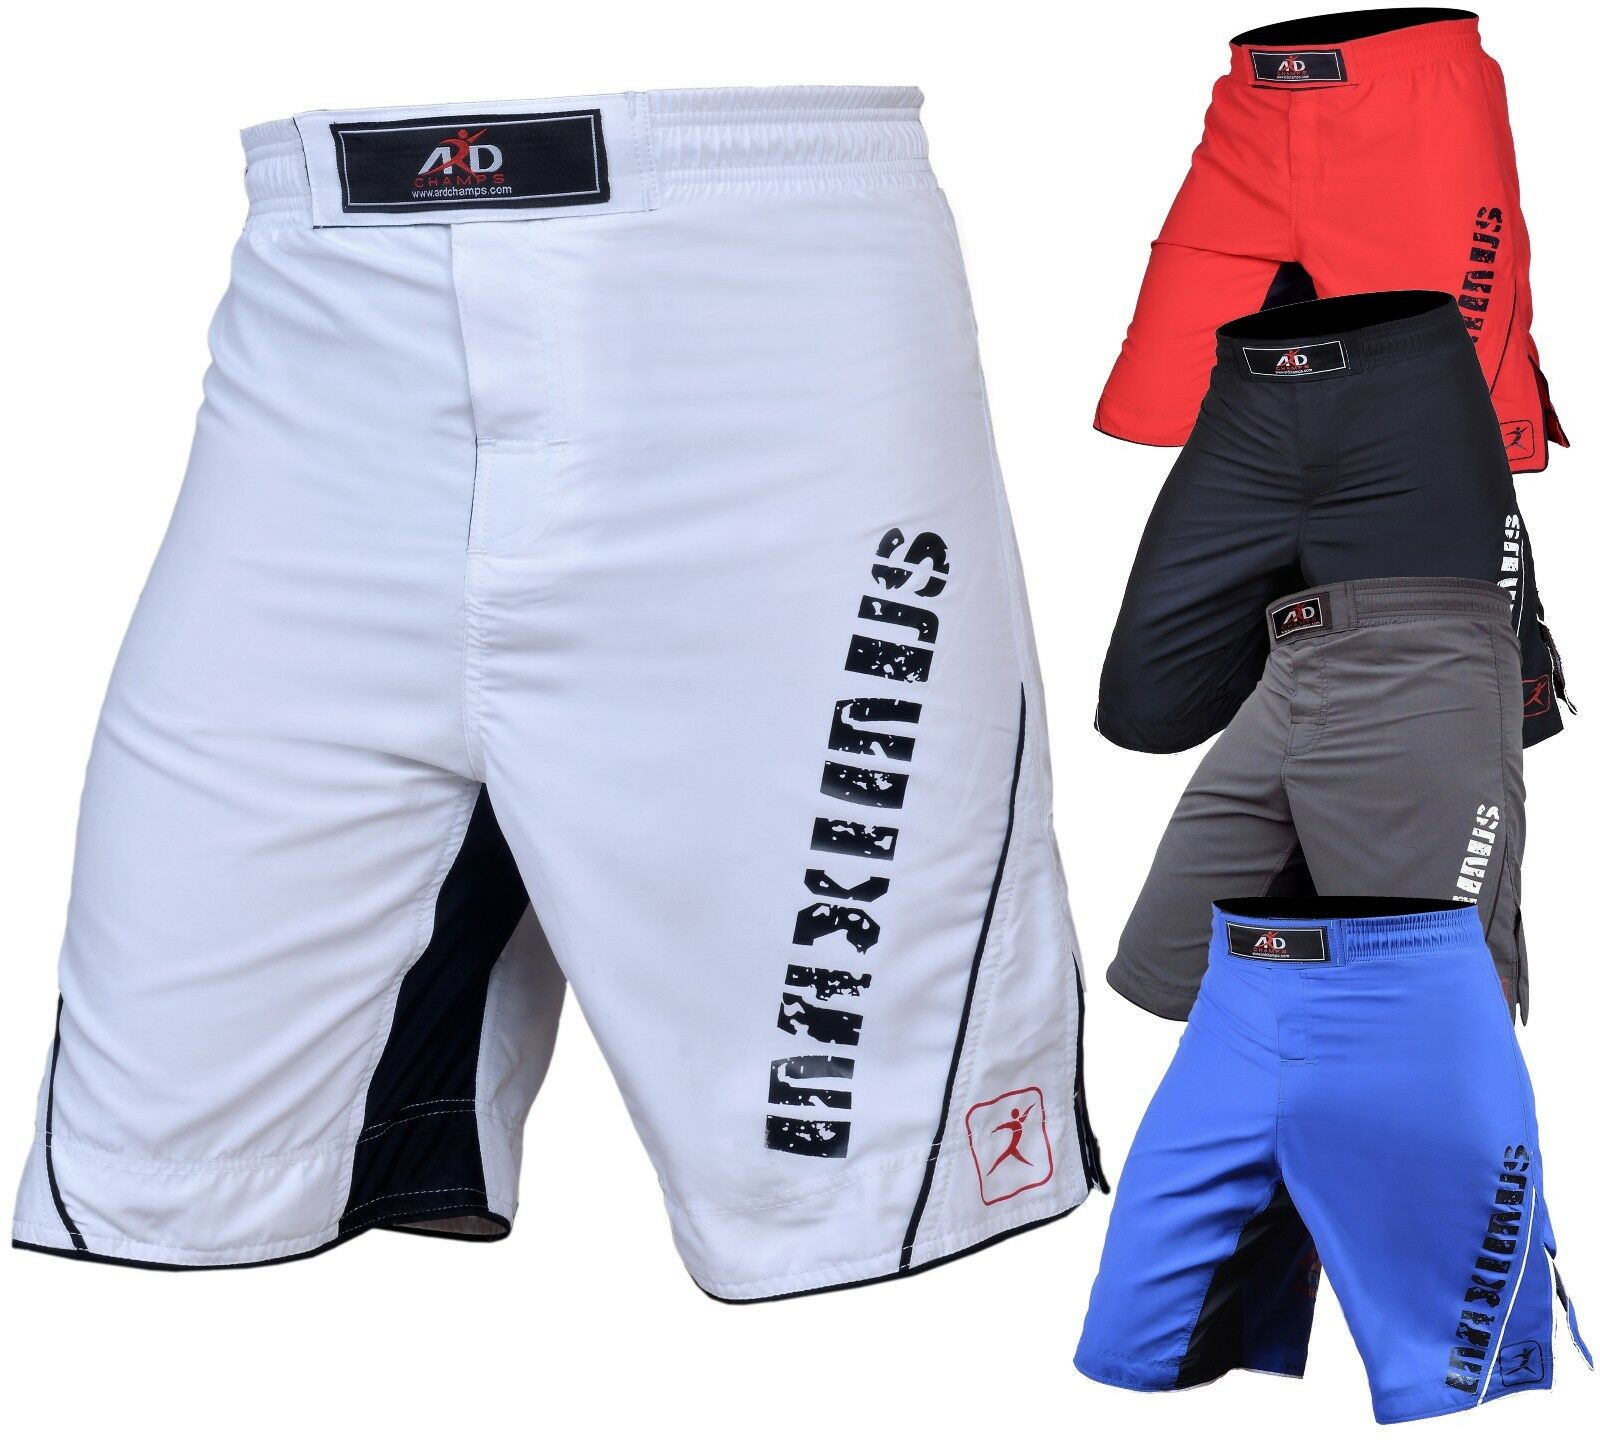 Ard Champs™ Mma Fight Shorts Ufc Cage Fight Clothing Grappling Thai Kick Boxing